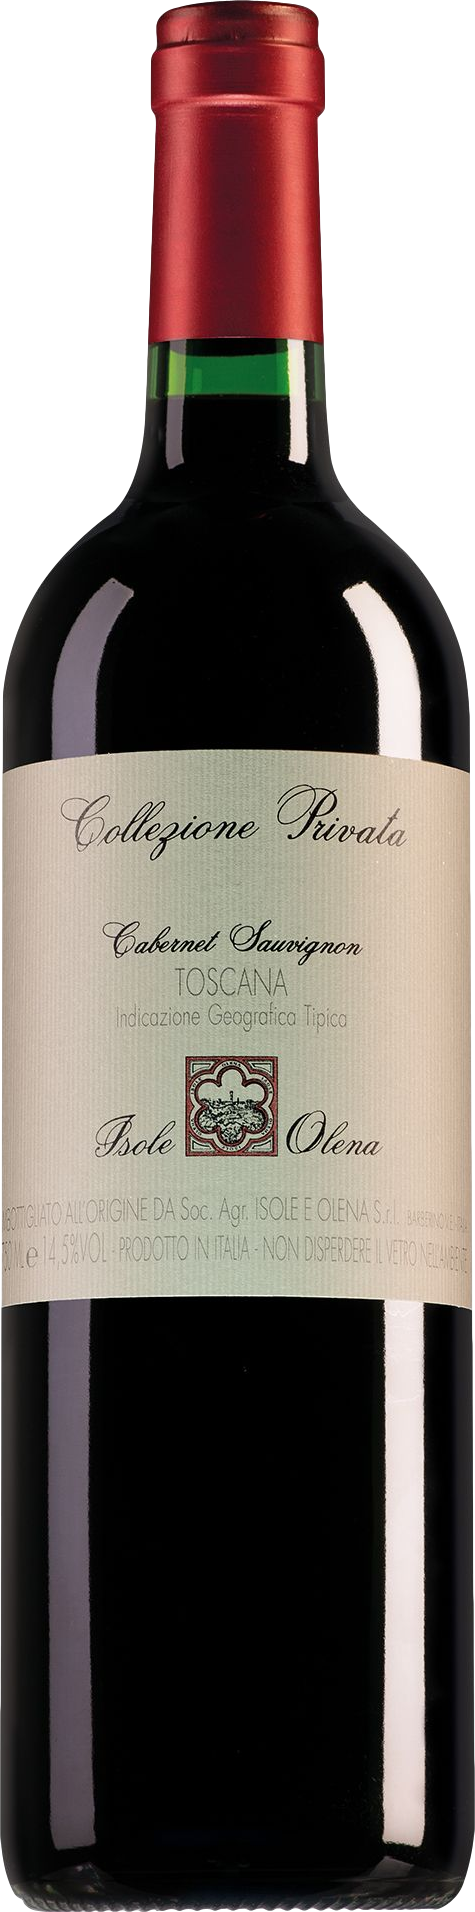 Product image of Isole e Olena Cabernet Sauvignon 2018 from 8wines